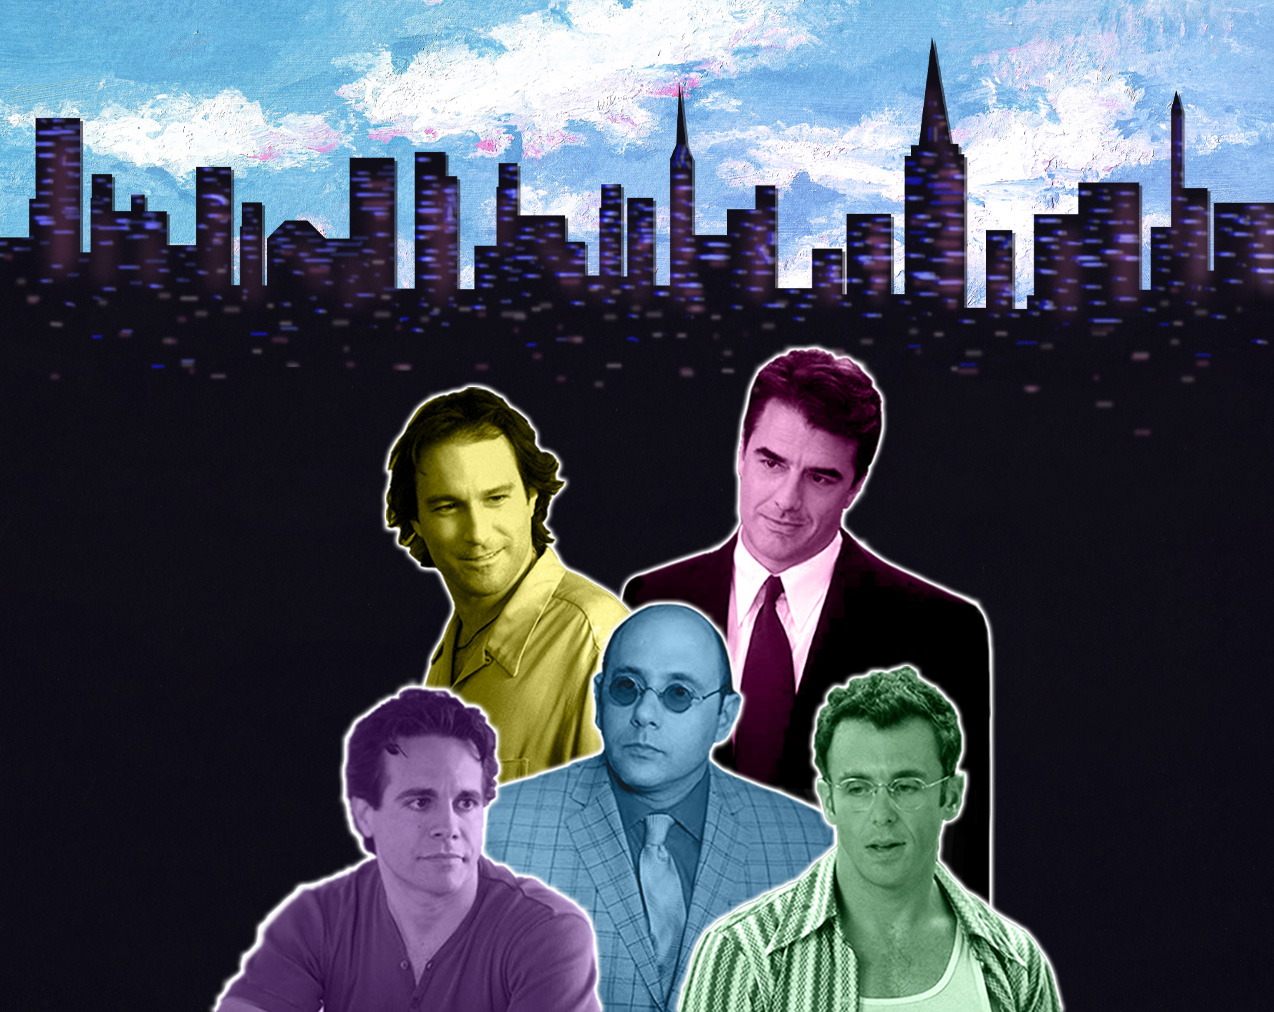 Digital collage featuring photographs of the 5 male characters from Sex and The City layered on top of the New York skyline.